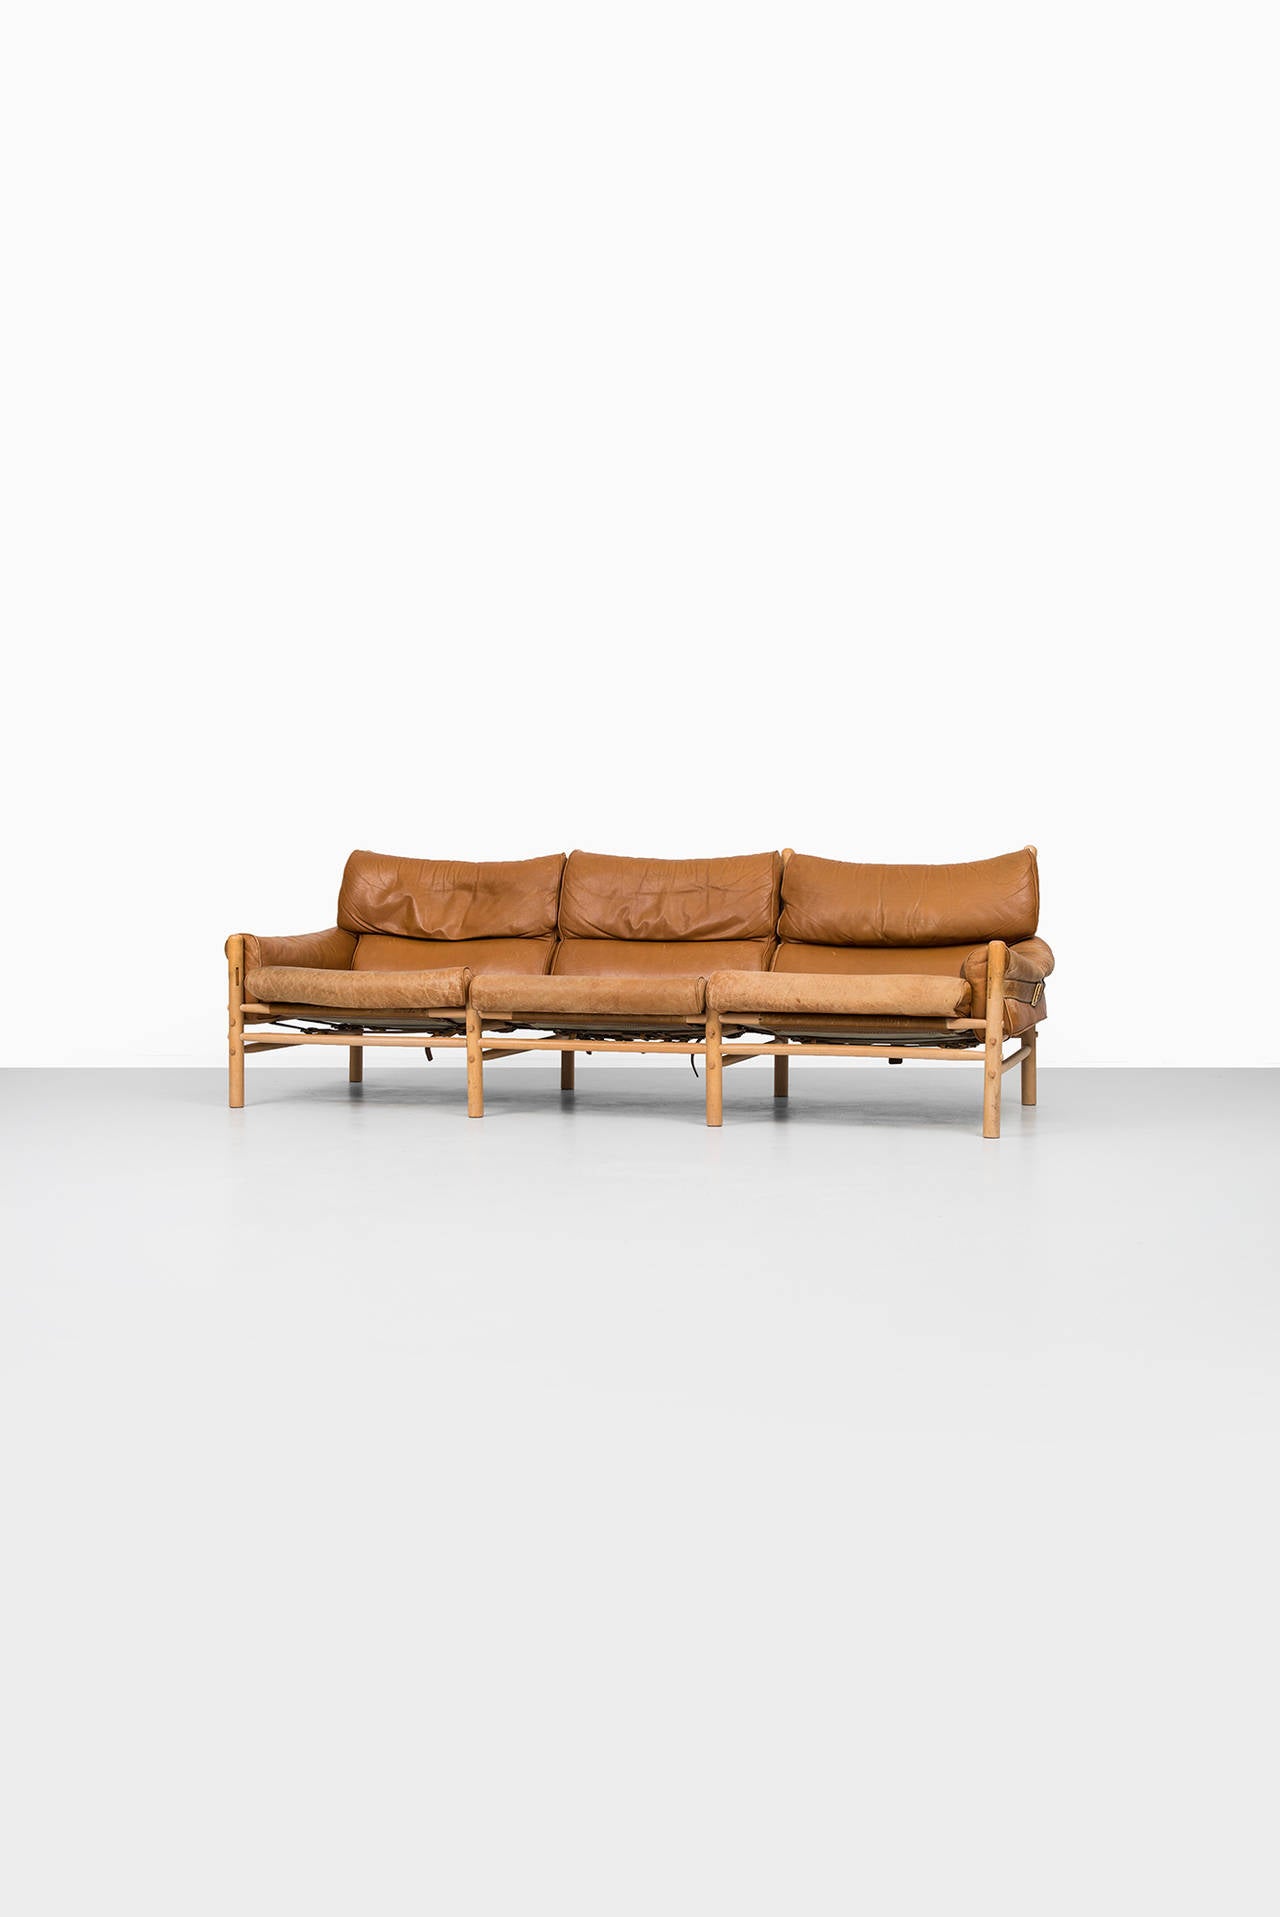 A mid century sofa model Kontiki designed by Arne Norell. Produced by Arne Norell AB in Aneby, Sweden.